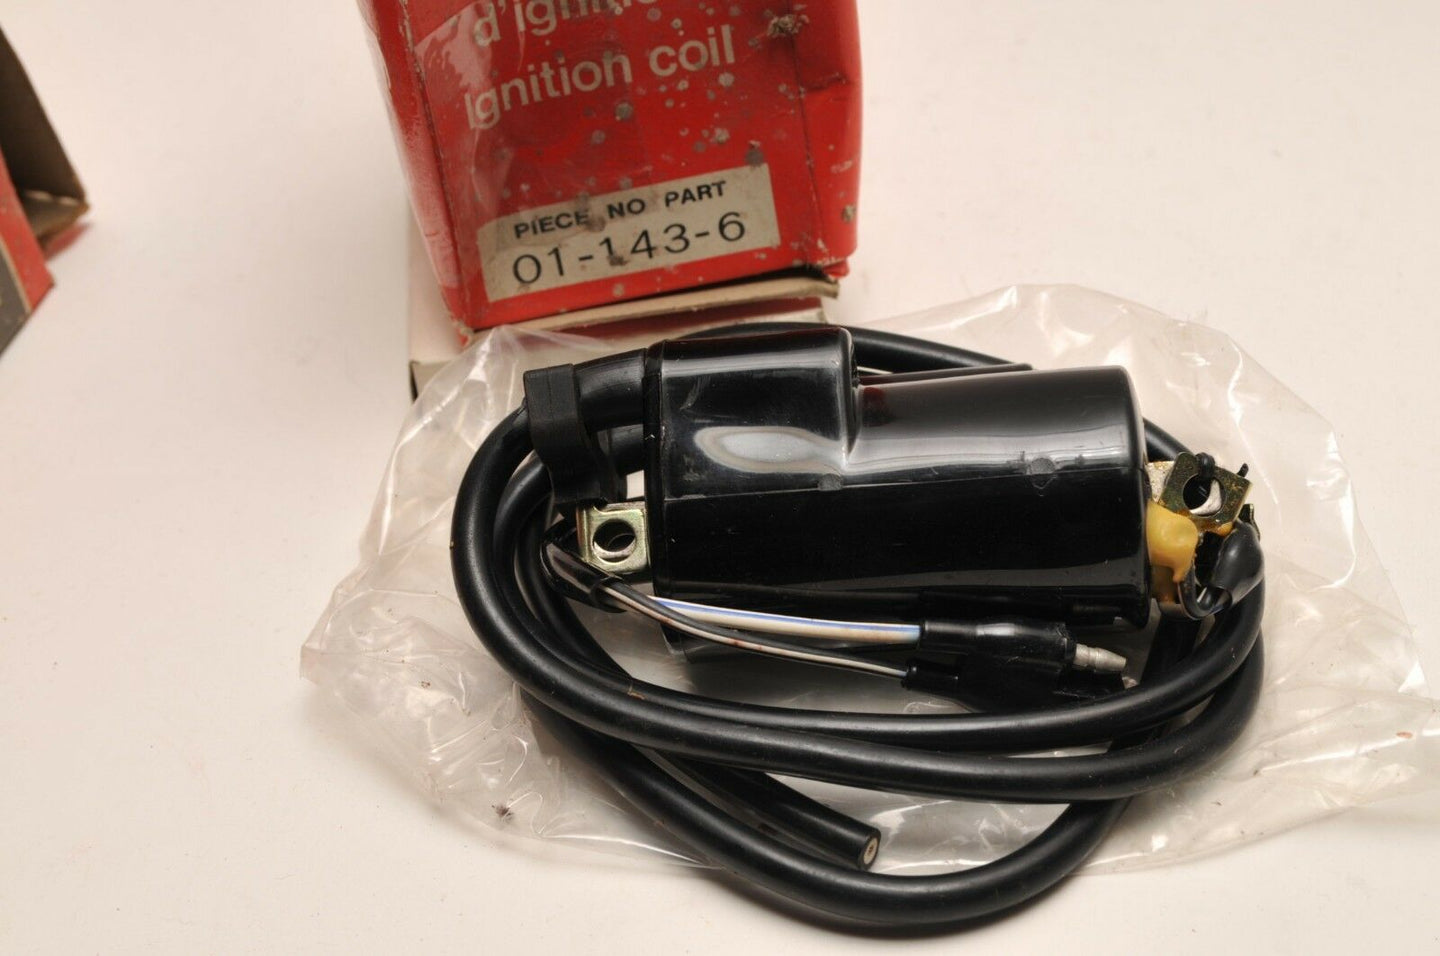 New Kimpex Ignition Coil 01-143-06 Arctic Cat 1976-1987 Twin models see list